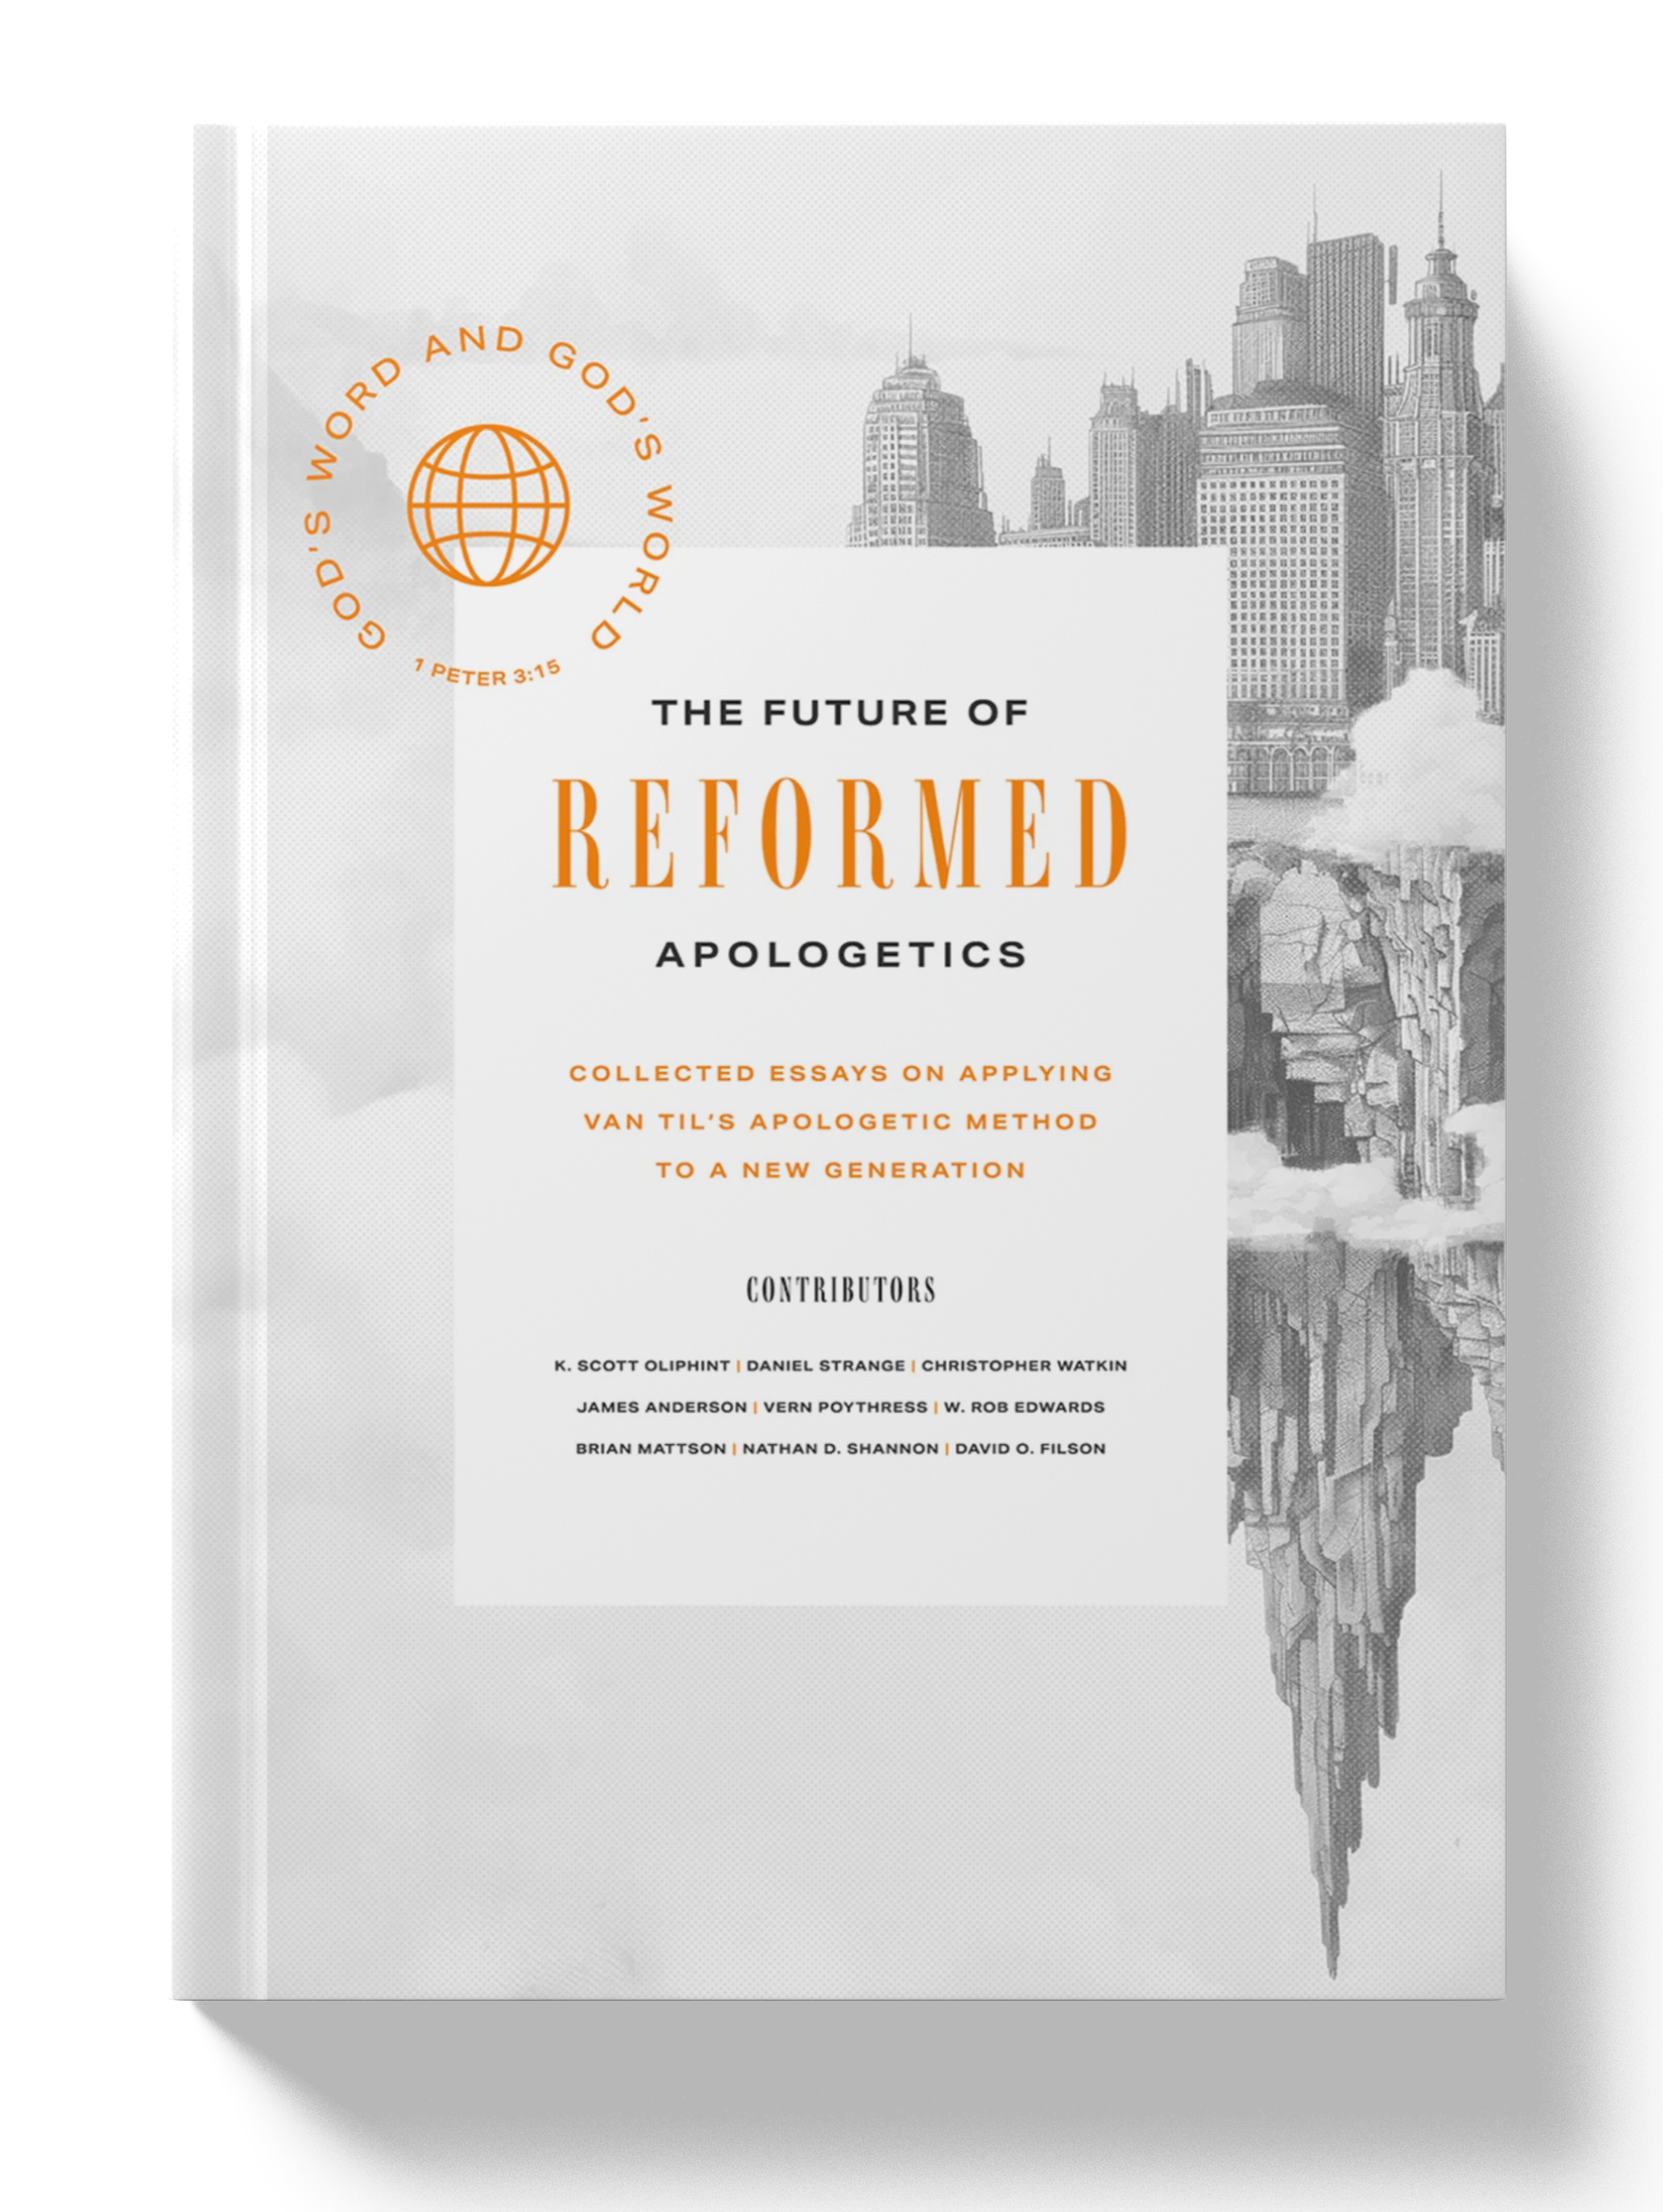 The Future of Reformed Apologetics: Collected Essays on Applying Van Til’s Apologetic Method to a New Generation